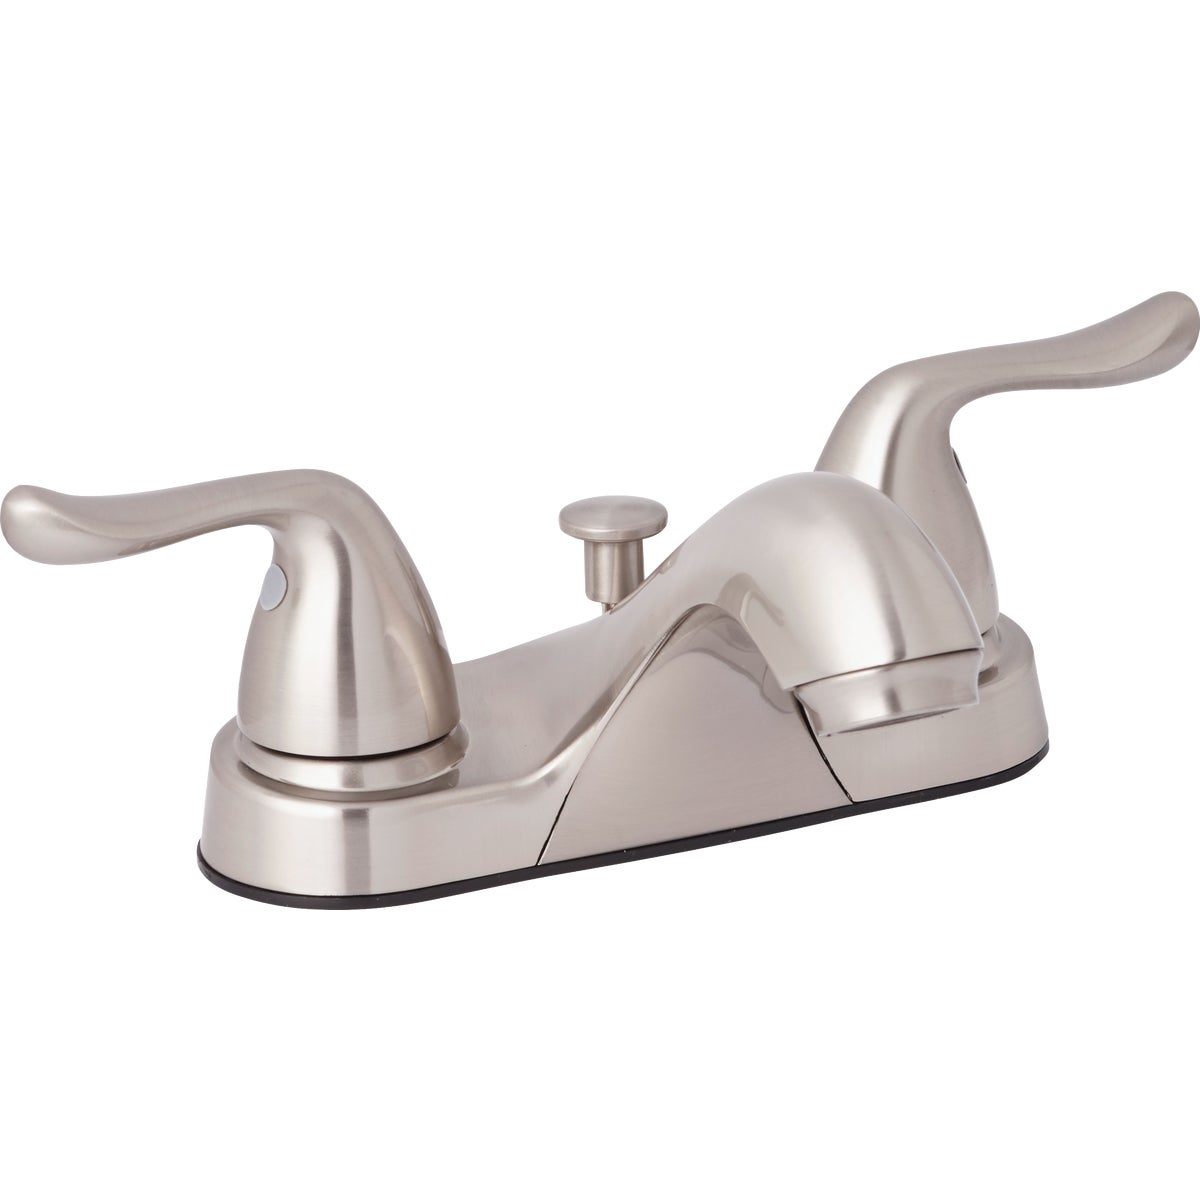 Home Impressions Brushed Nickel 2-Handle Knob 4 In. Centerset Bathroom Faucet with Pop-Up